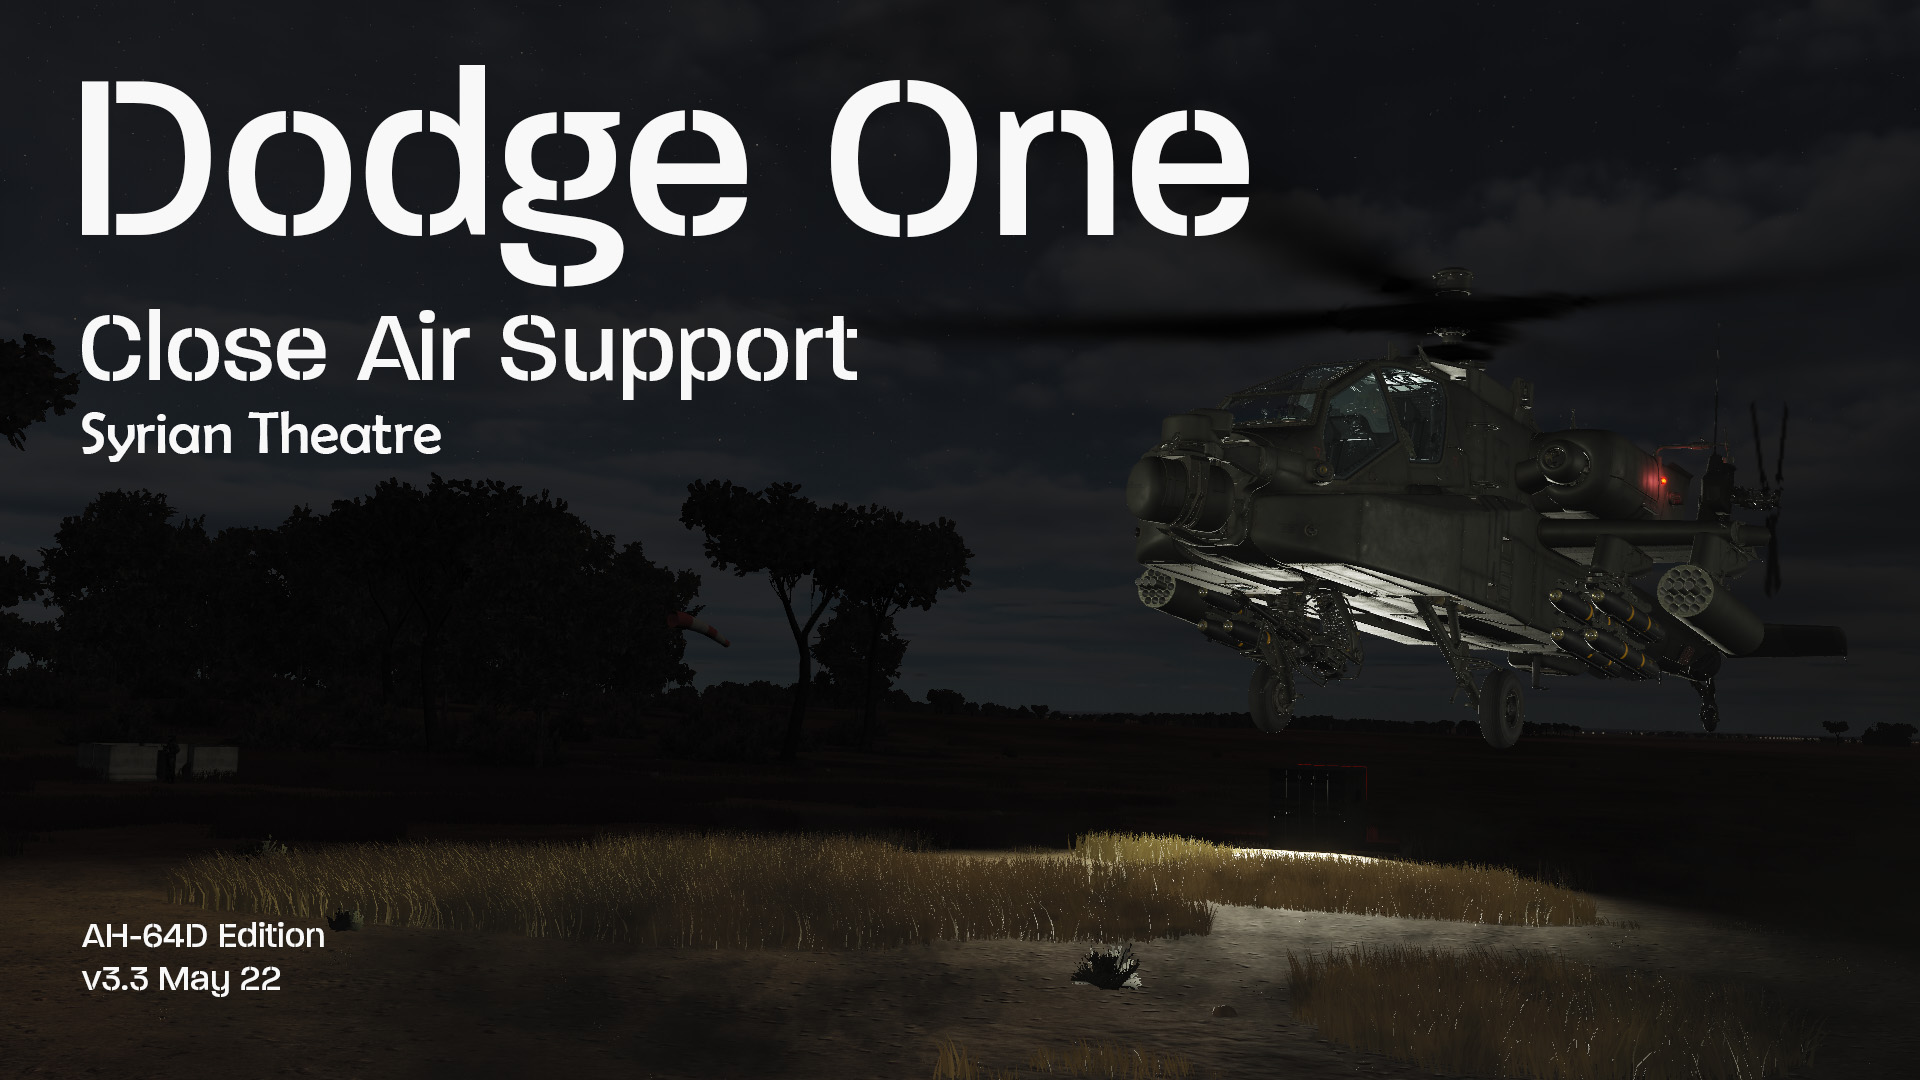  Dodge One v3.3 - CAS in the Northern Syrian theatre for single or multiplayer AH-64D